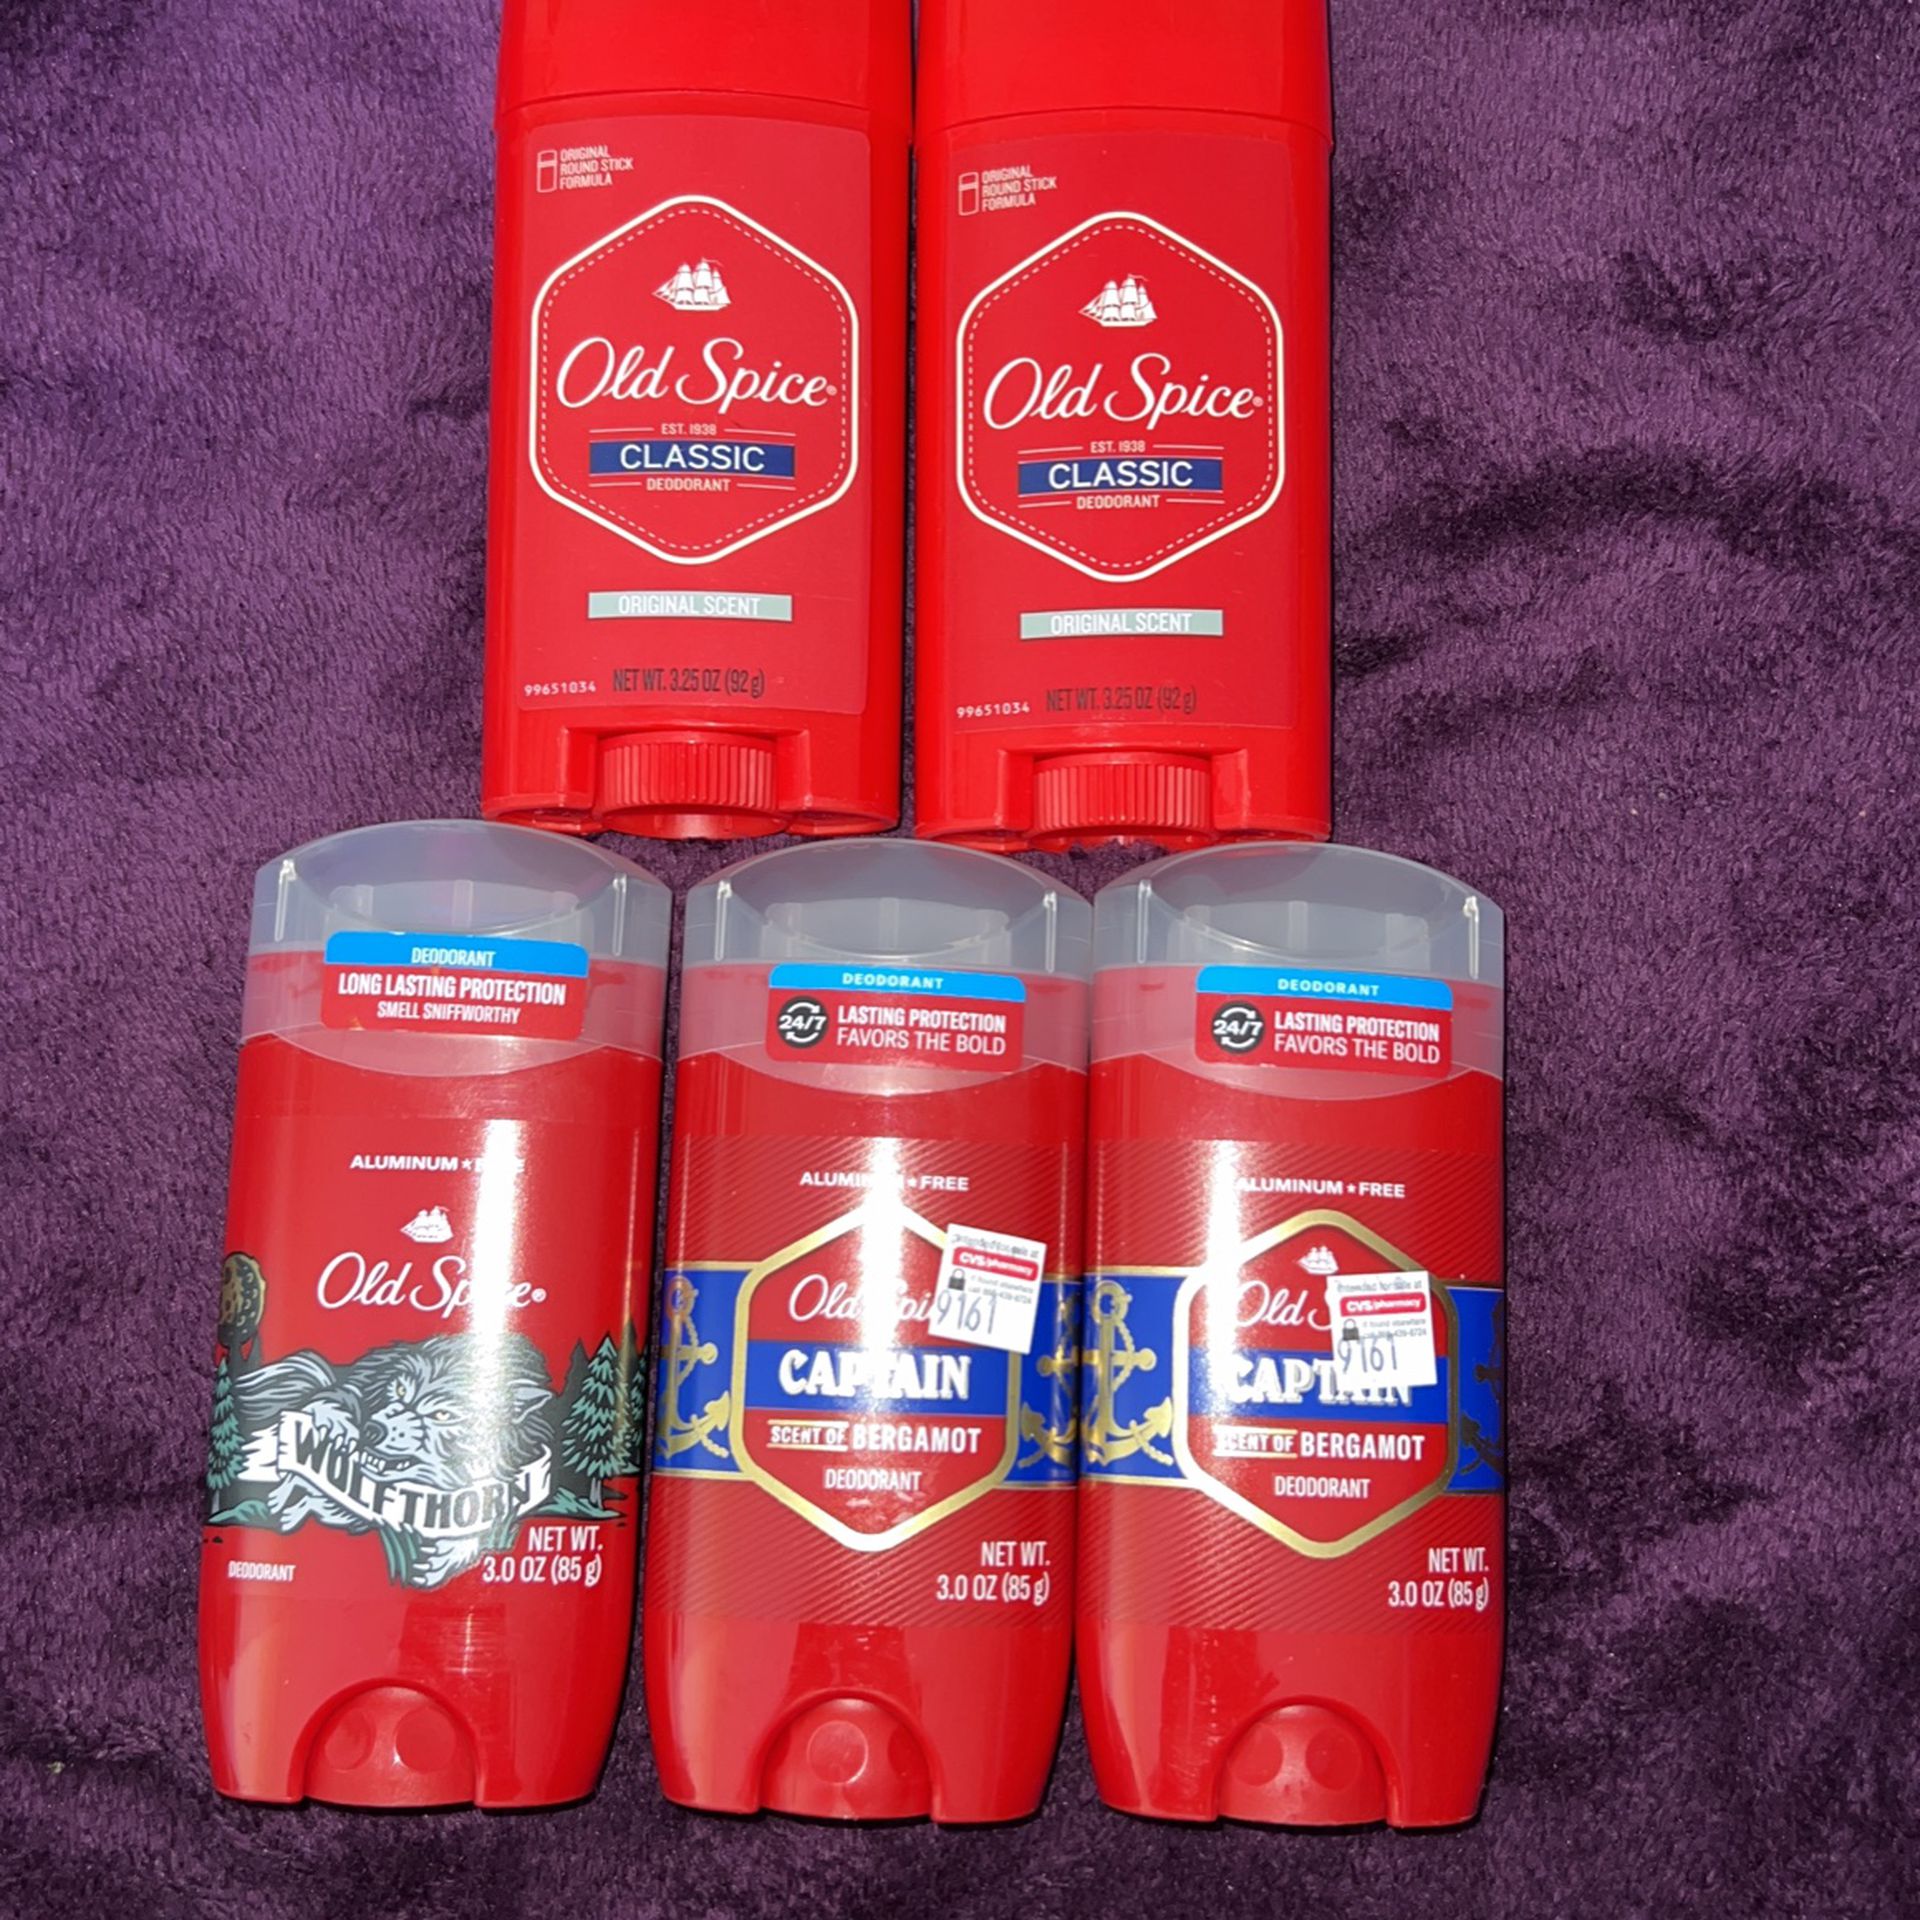 Old Spice Deodorant, $4 Each